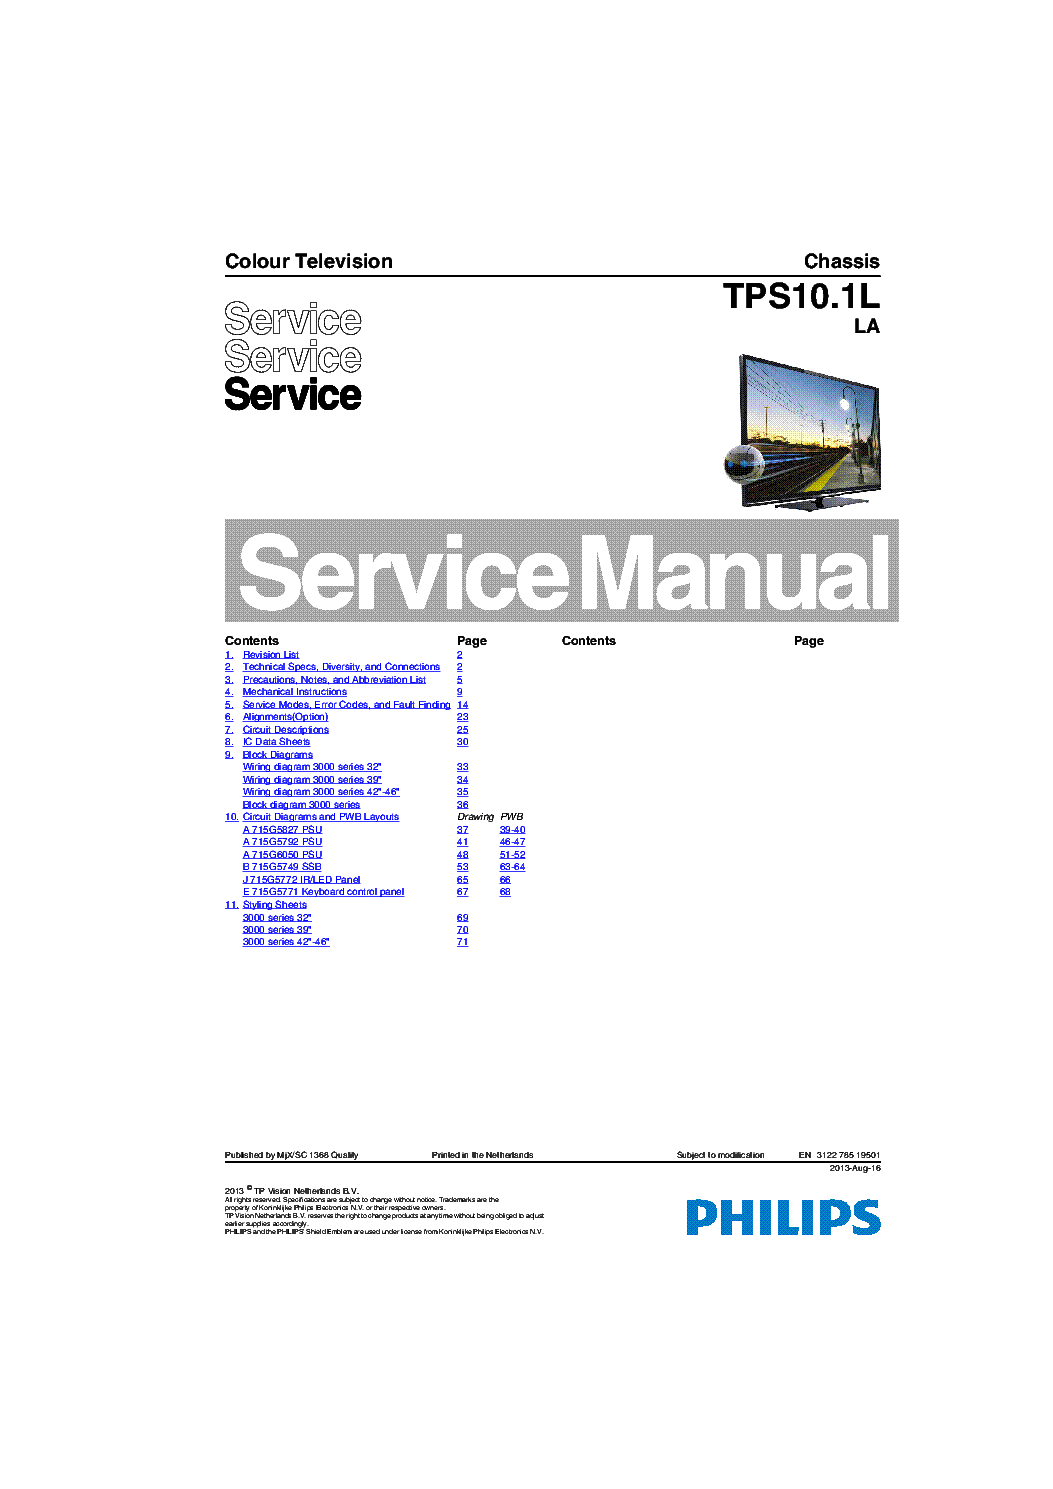 PHILIPS TPS10.1LLA 312278519501 130816 service manual (1st page)